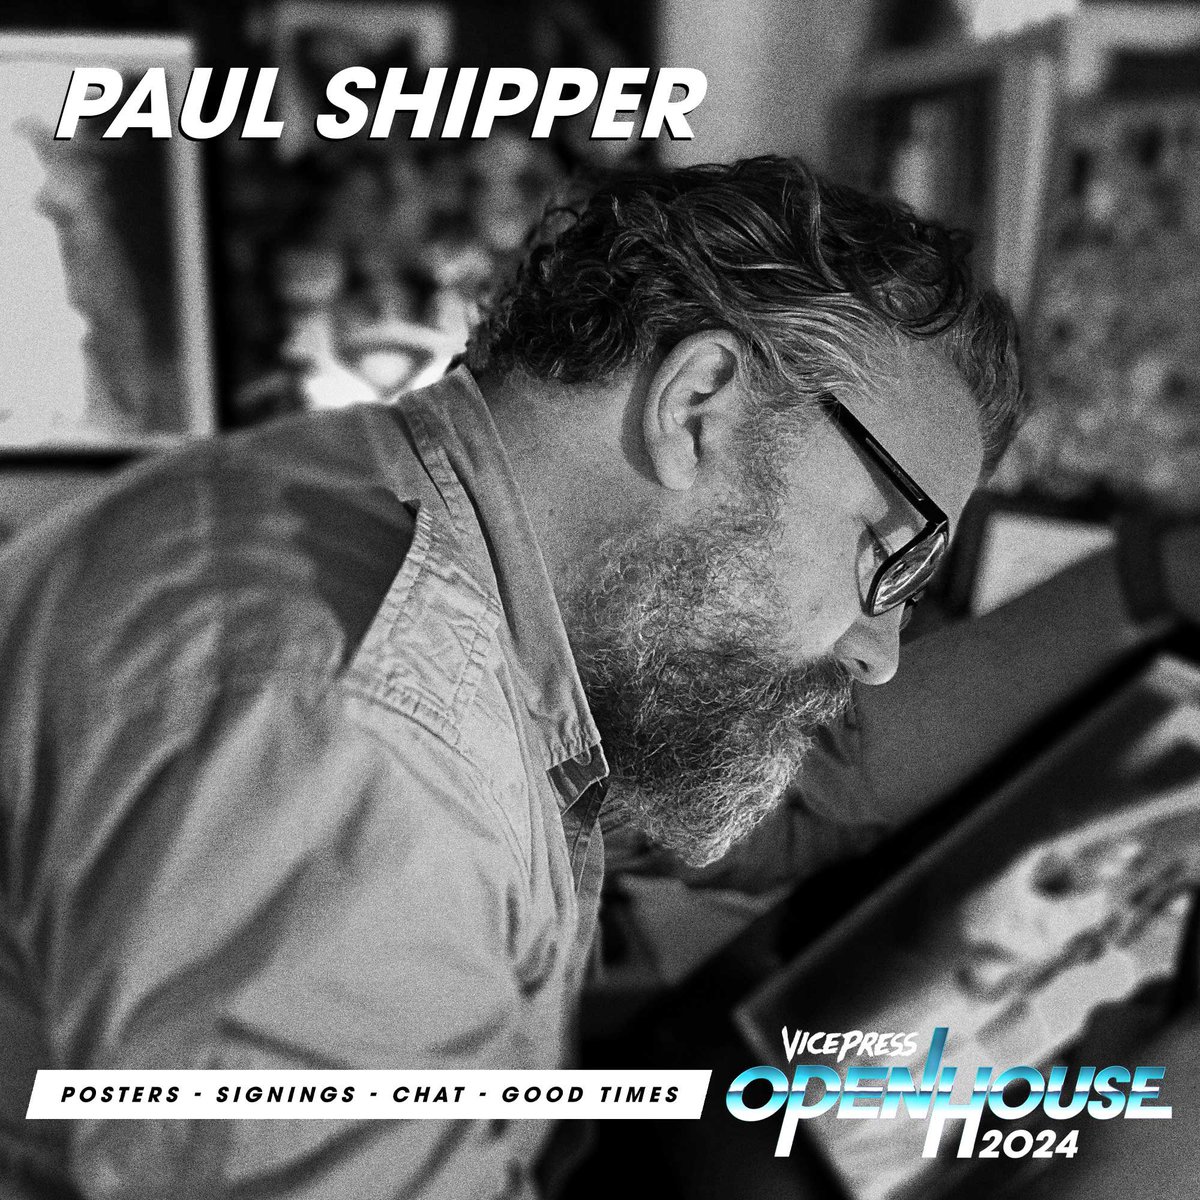 It’s just two weeks today until Open House 2024, our very own poster convention in the heart of Sheffield so time for another guest - @PaulShipper! We have been friends with Paul for a long time, so it is great to have him along. For more info, head to VicePressOpenHouse.co.uk